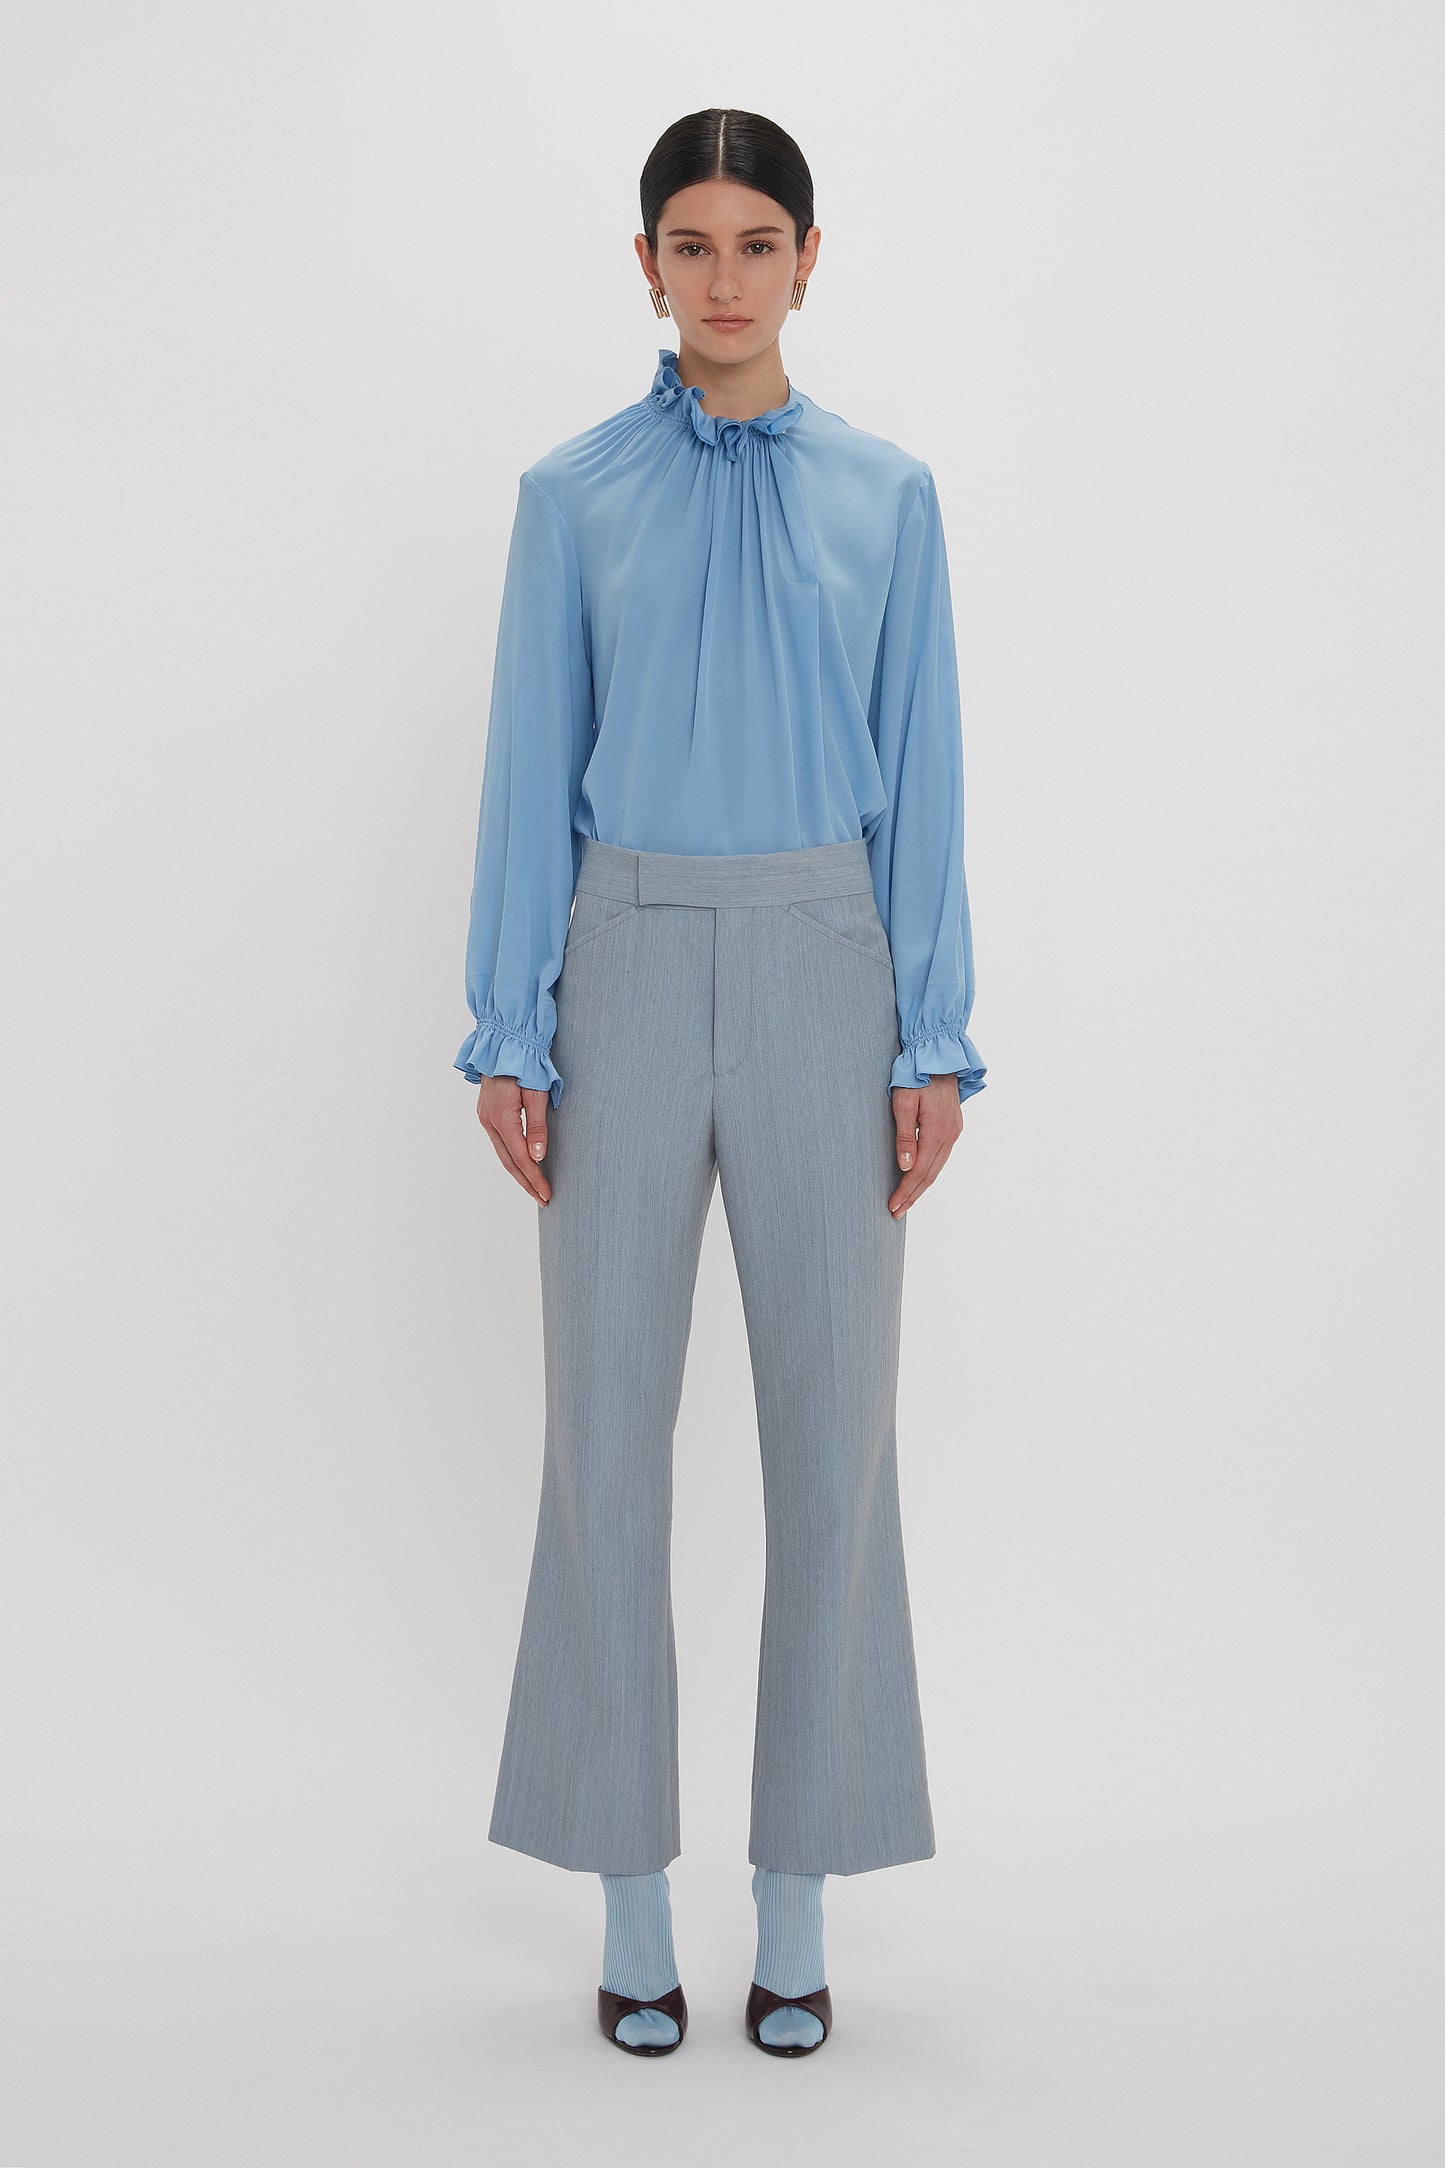 A person stands against a plain white background, wearing an Exclusive Ruffle Neck Blouse In Cornflower Blue by Victoria Beckham made of crepe de chine fabric with matching high-waisted, light gray pants featuring flared legs and blue socks paired with black open-toe heels.